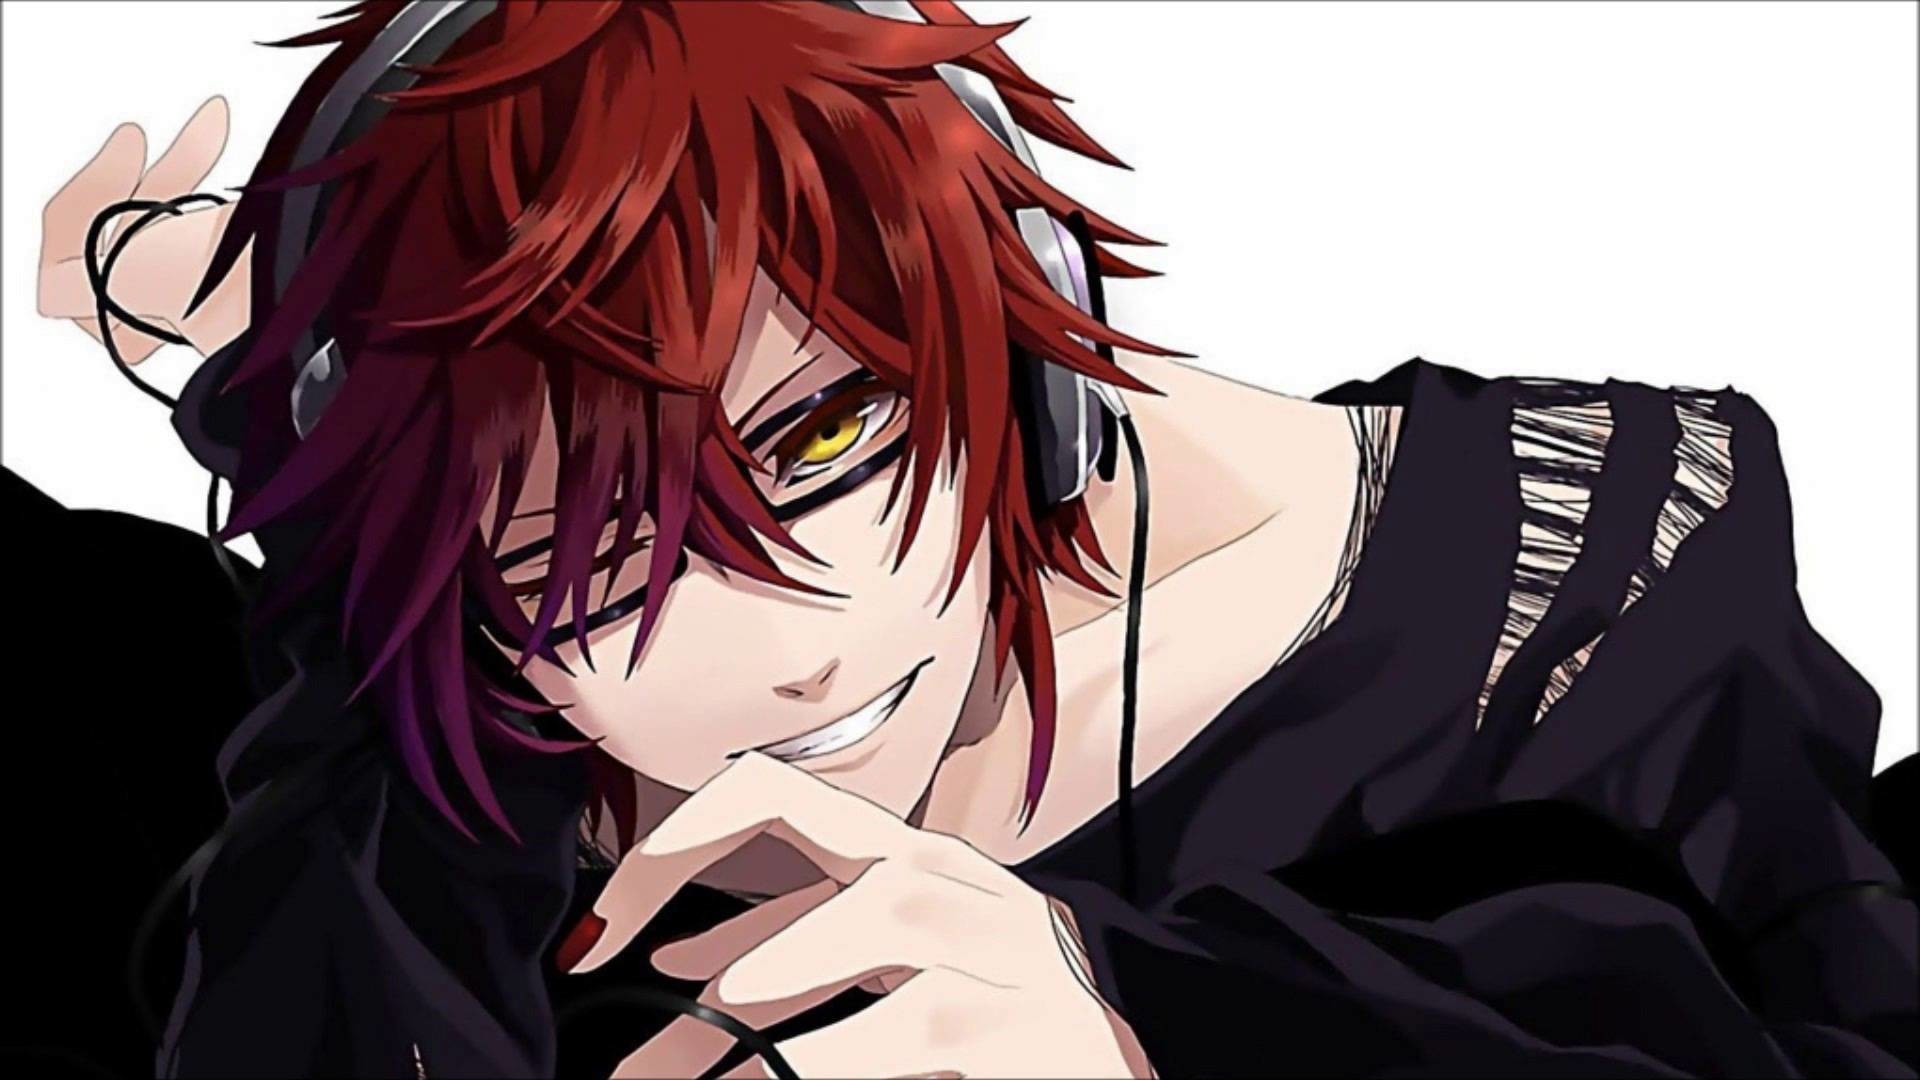 1920x1080 Image for grell sutcliff wallpaper